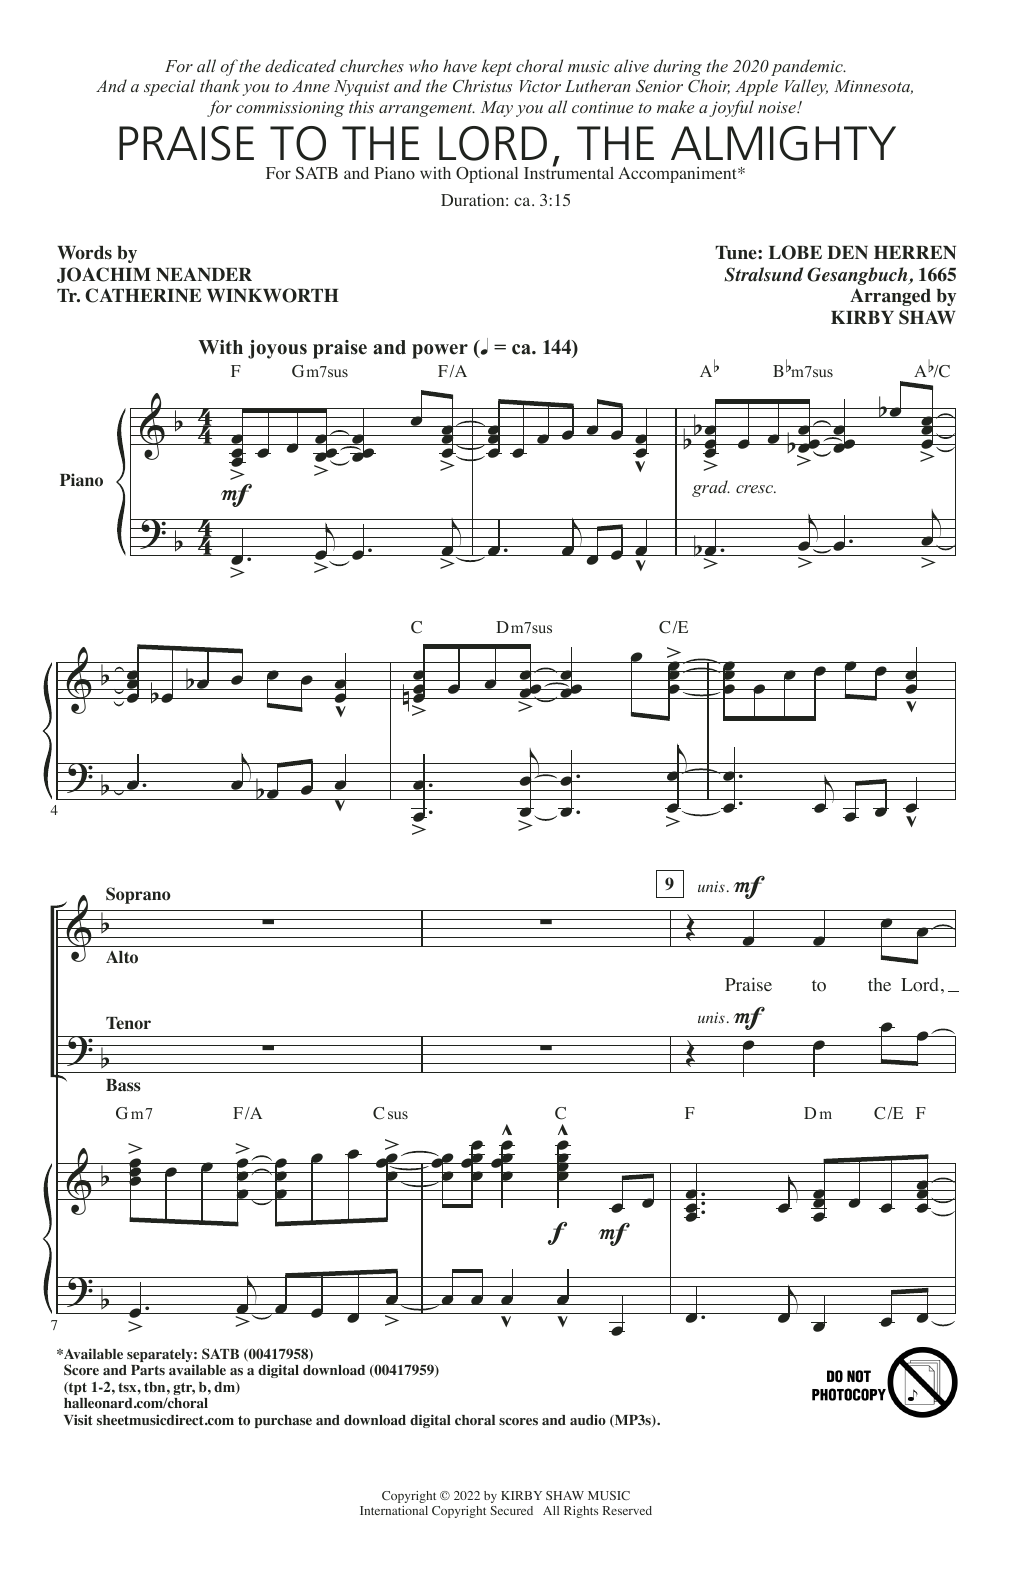 Download Kirby Shaw Praise To The Lord, The Almighty Sheet Music